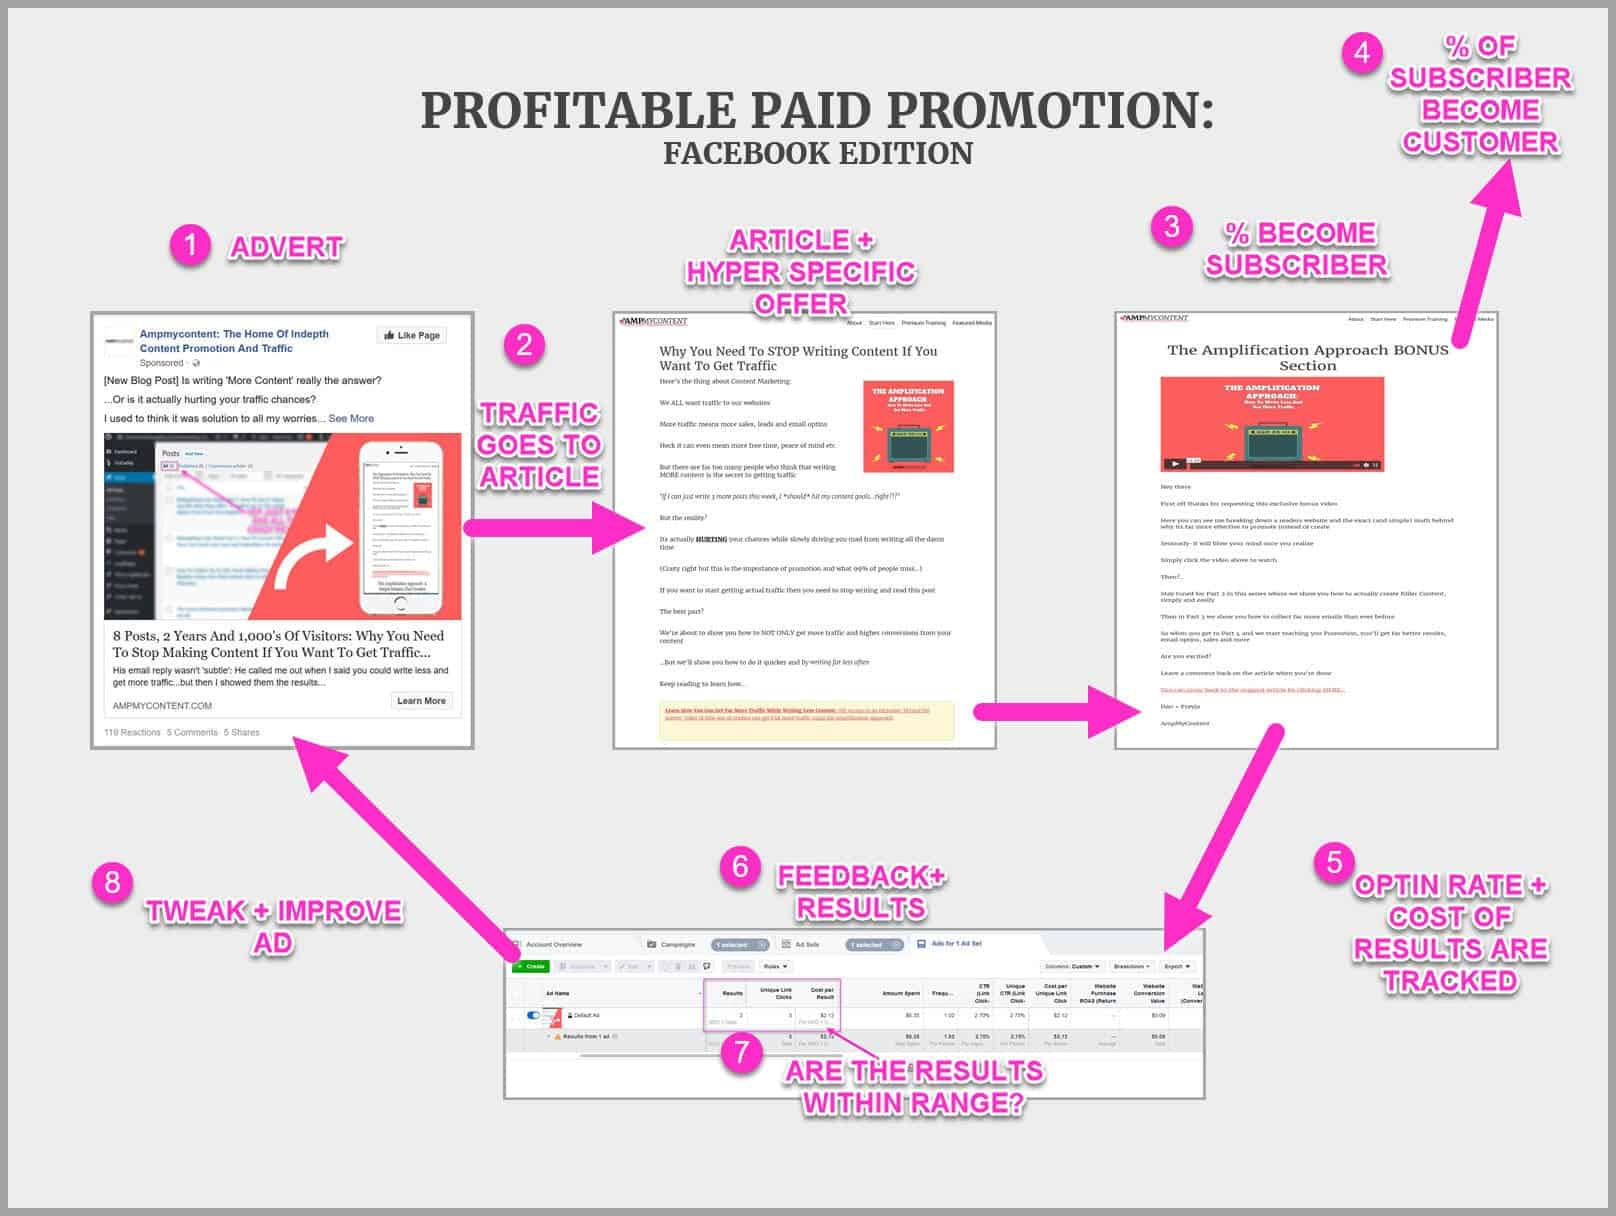 The 4 stage process to profitable promoted content, on Facebook